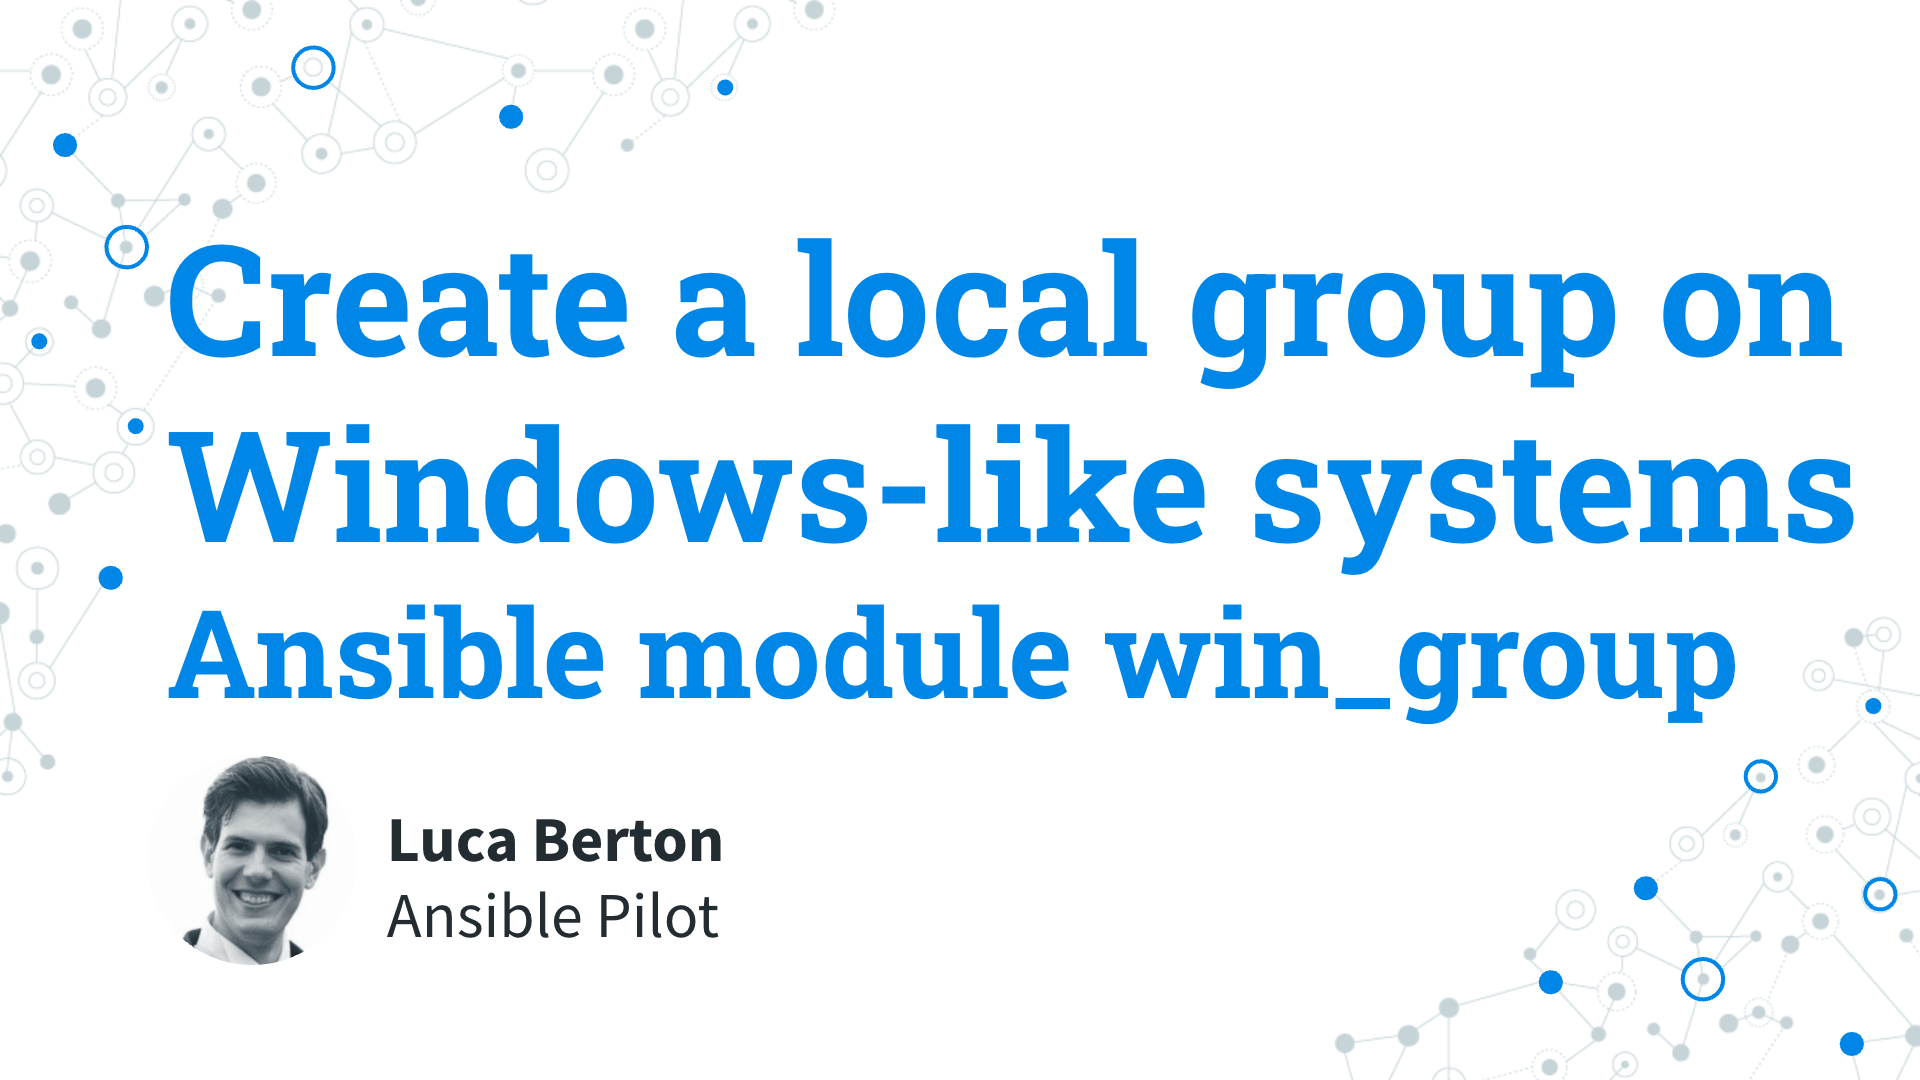 Create a local group on Windows-like systems - Ansible module win_group